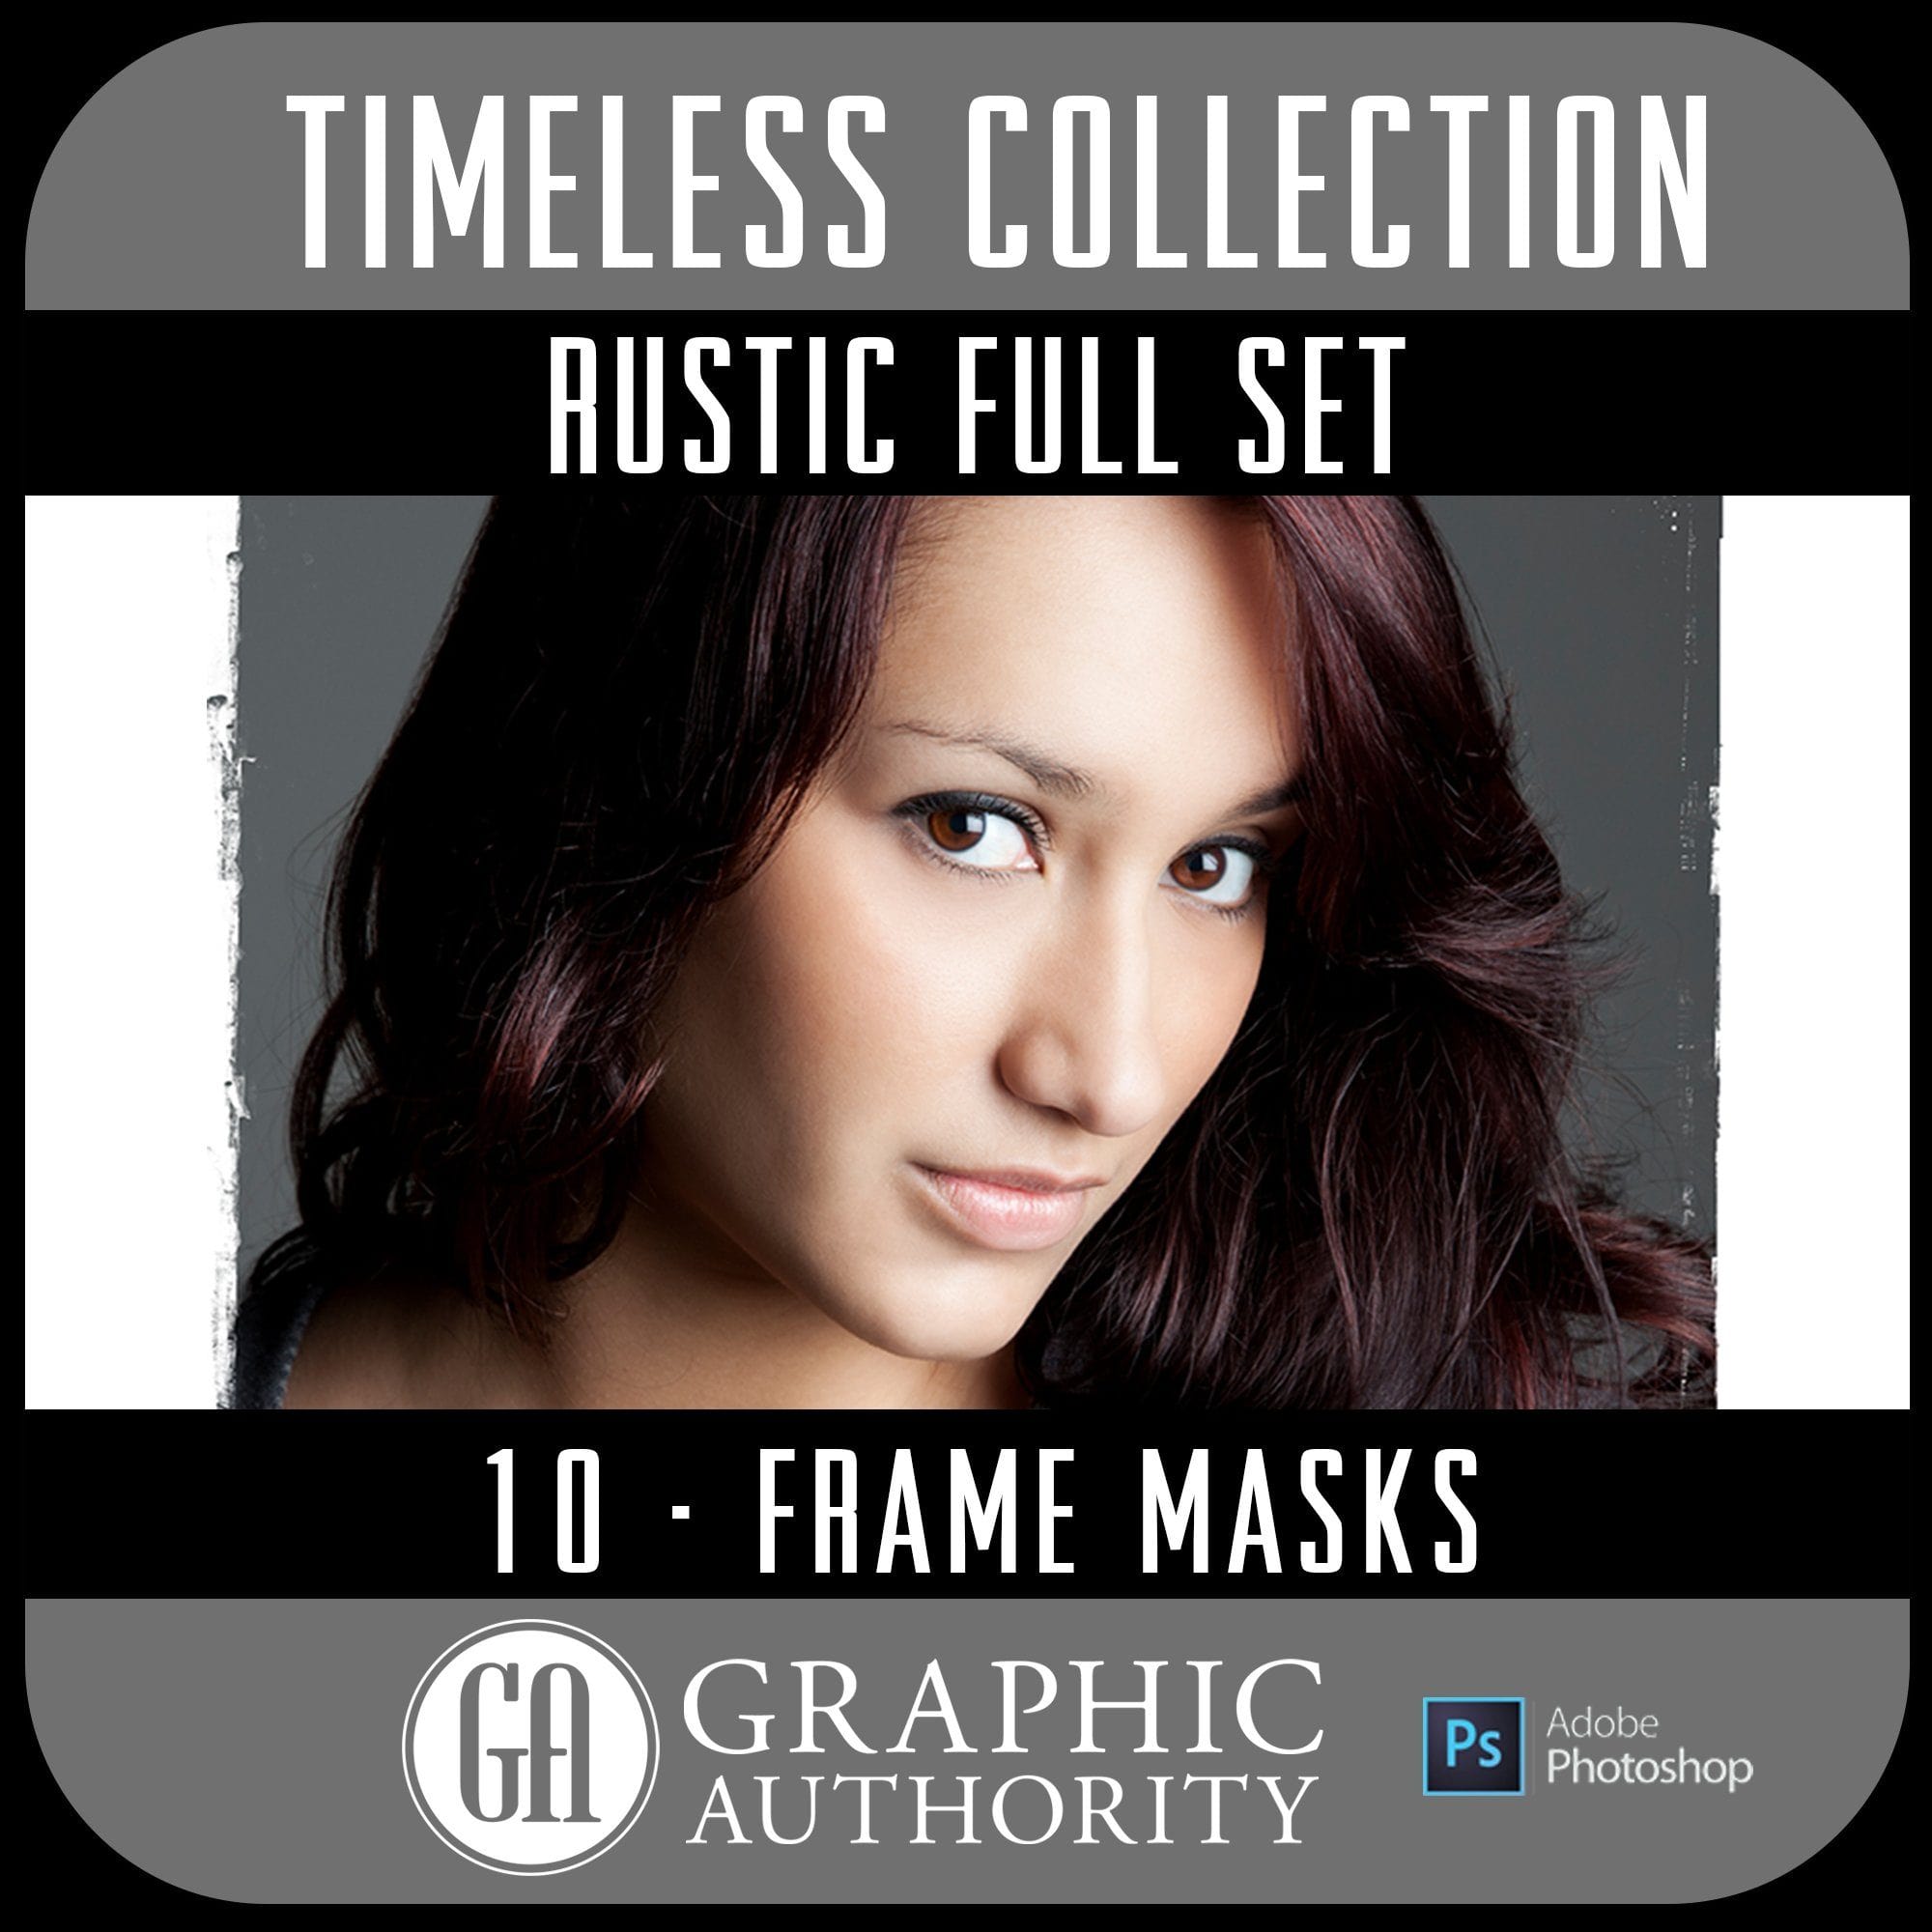 Timeless - Rustic Image Masks - Full Collection-Photoshop Template - Graphic Authority